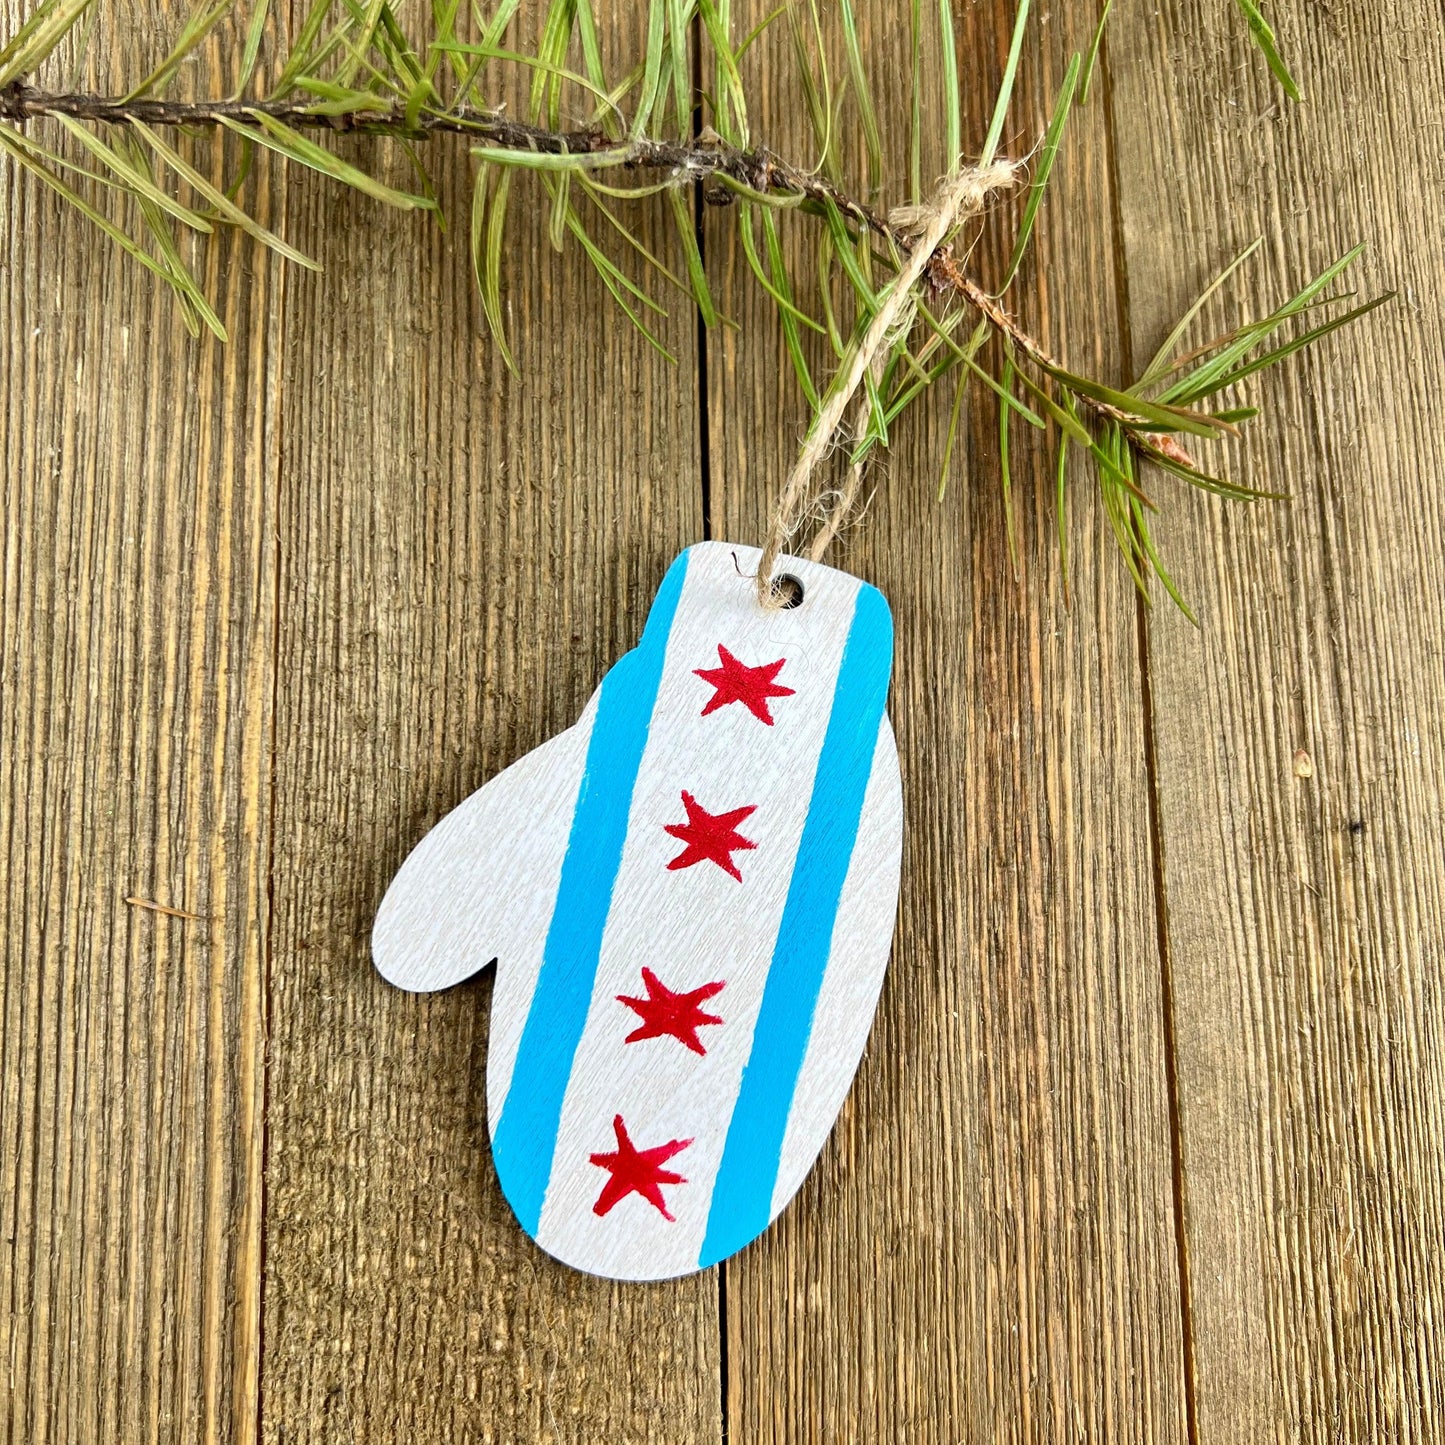 Chicago Themed Ornaments